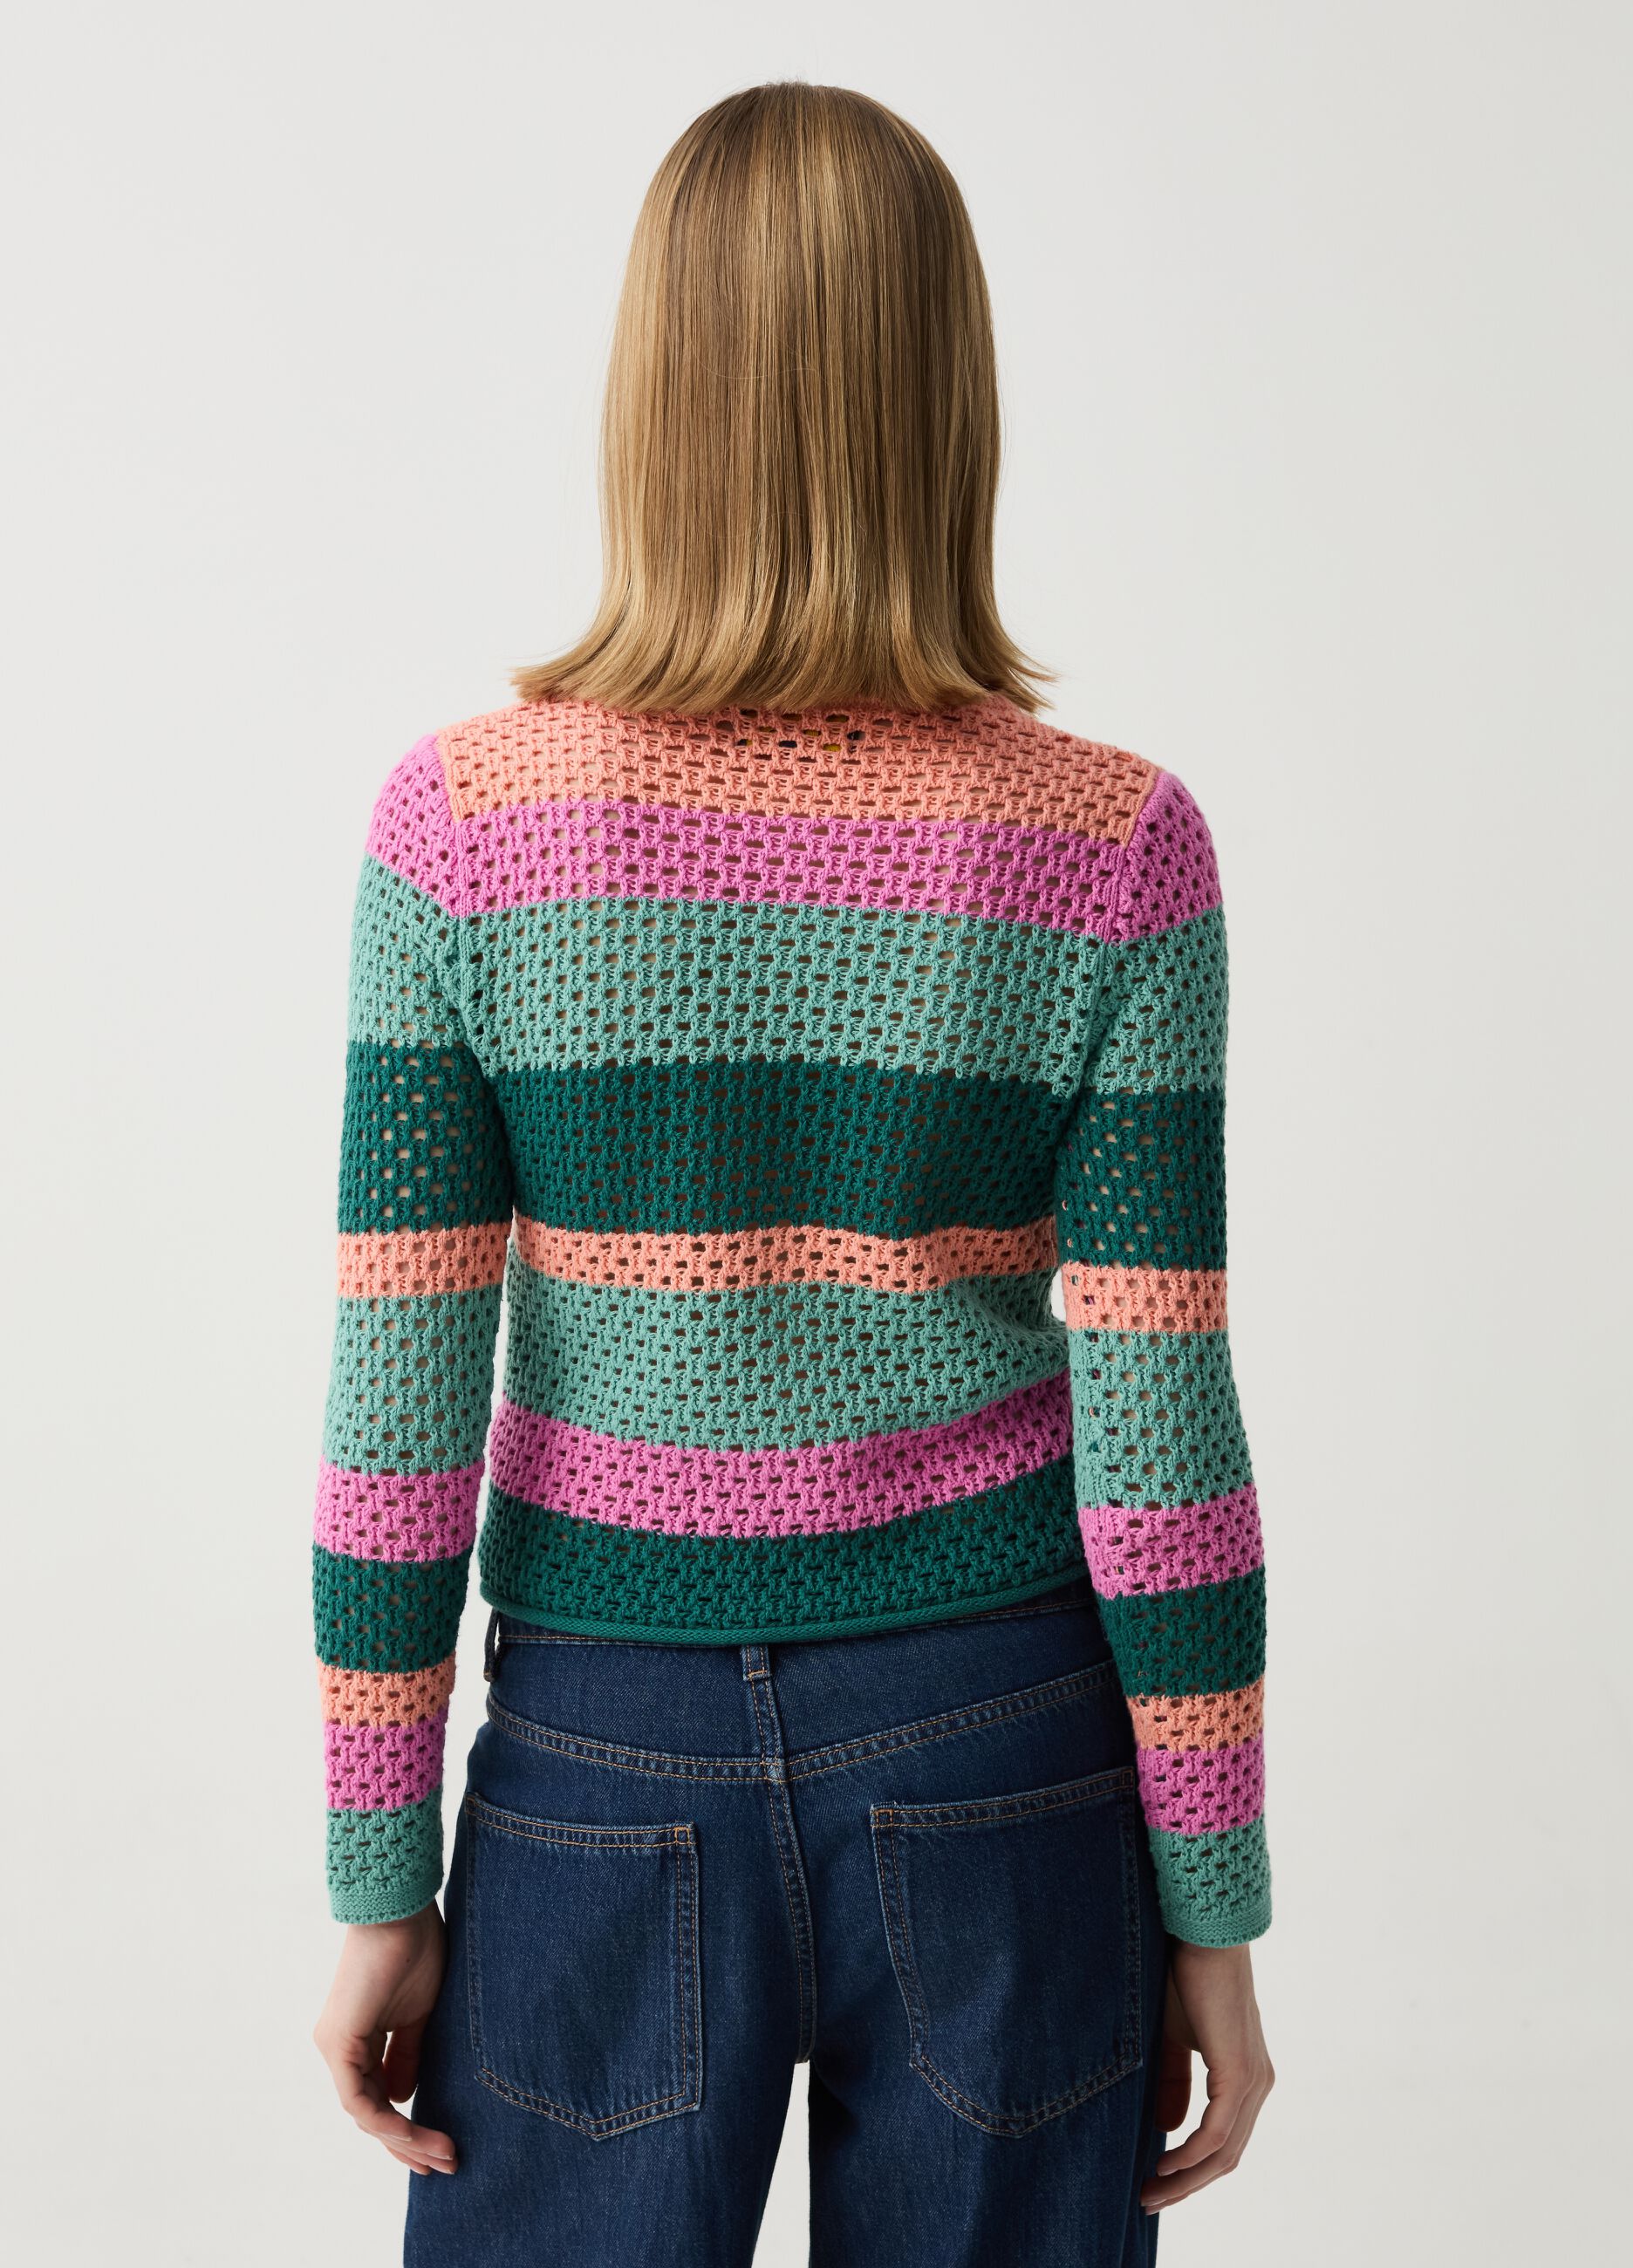 Crochet pullover with multicoloured stripes